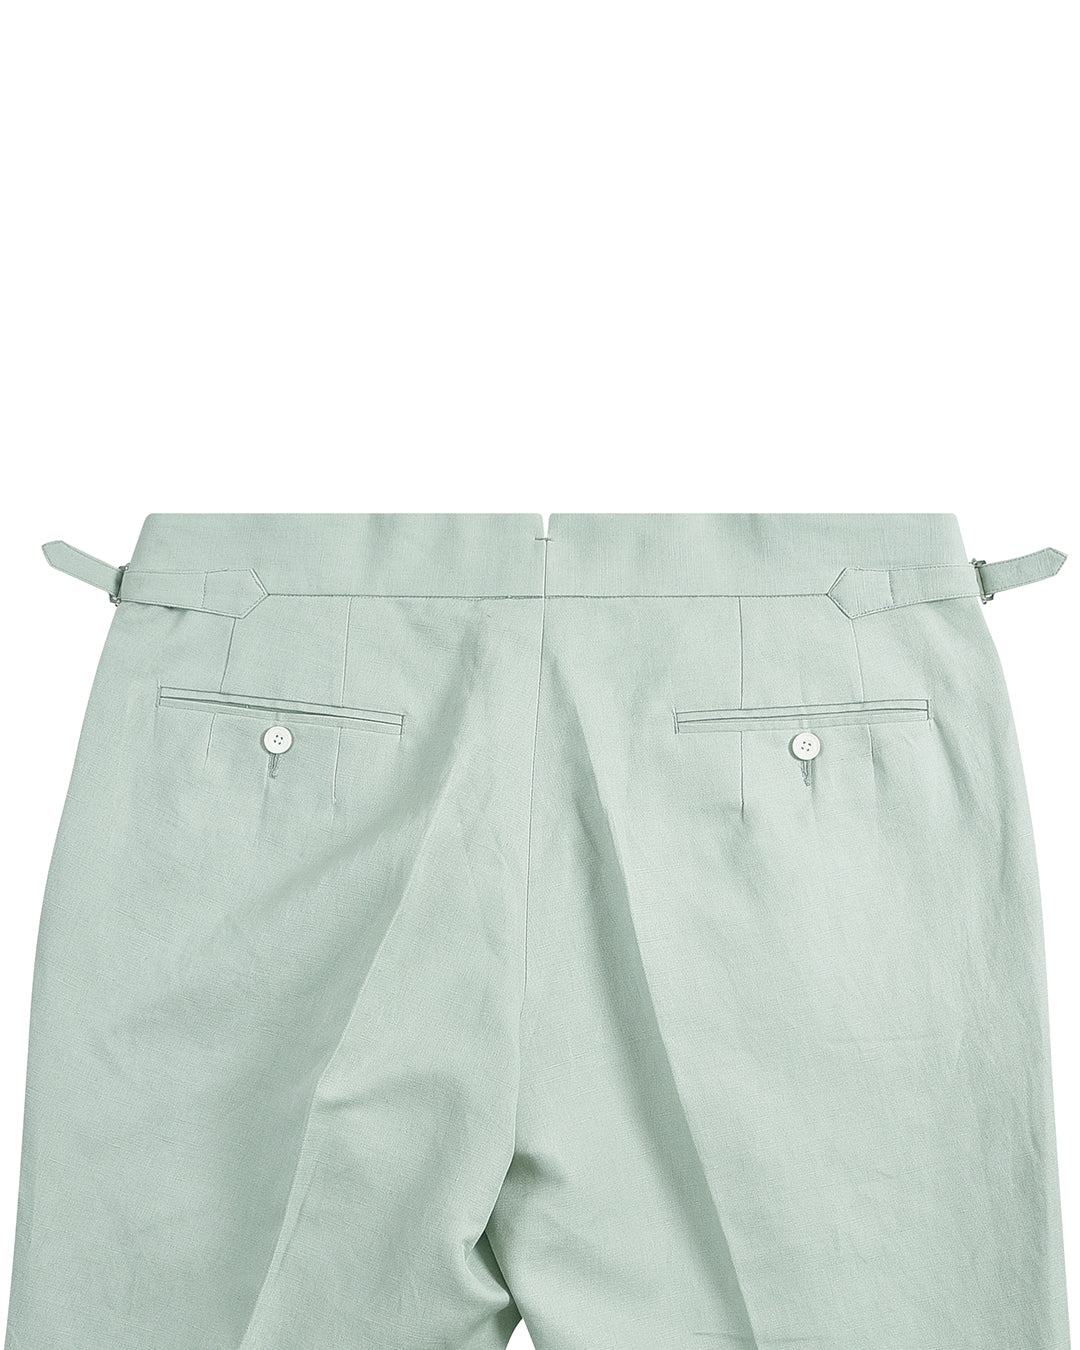 Back view of custom linen canvas pants for men by Luxire in pale green